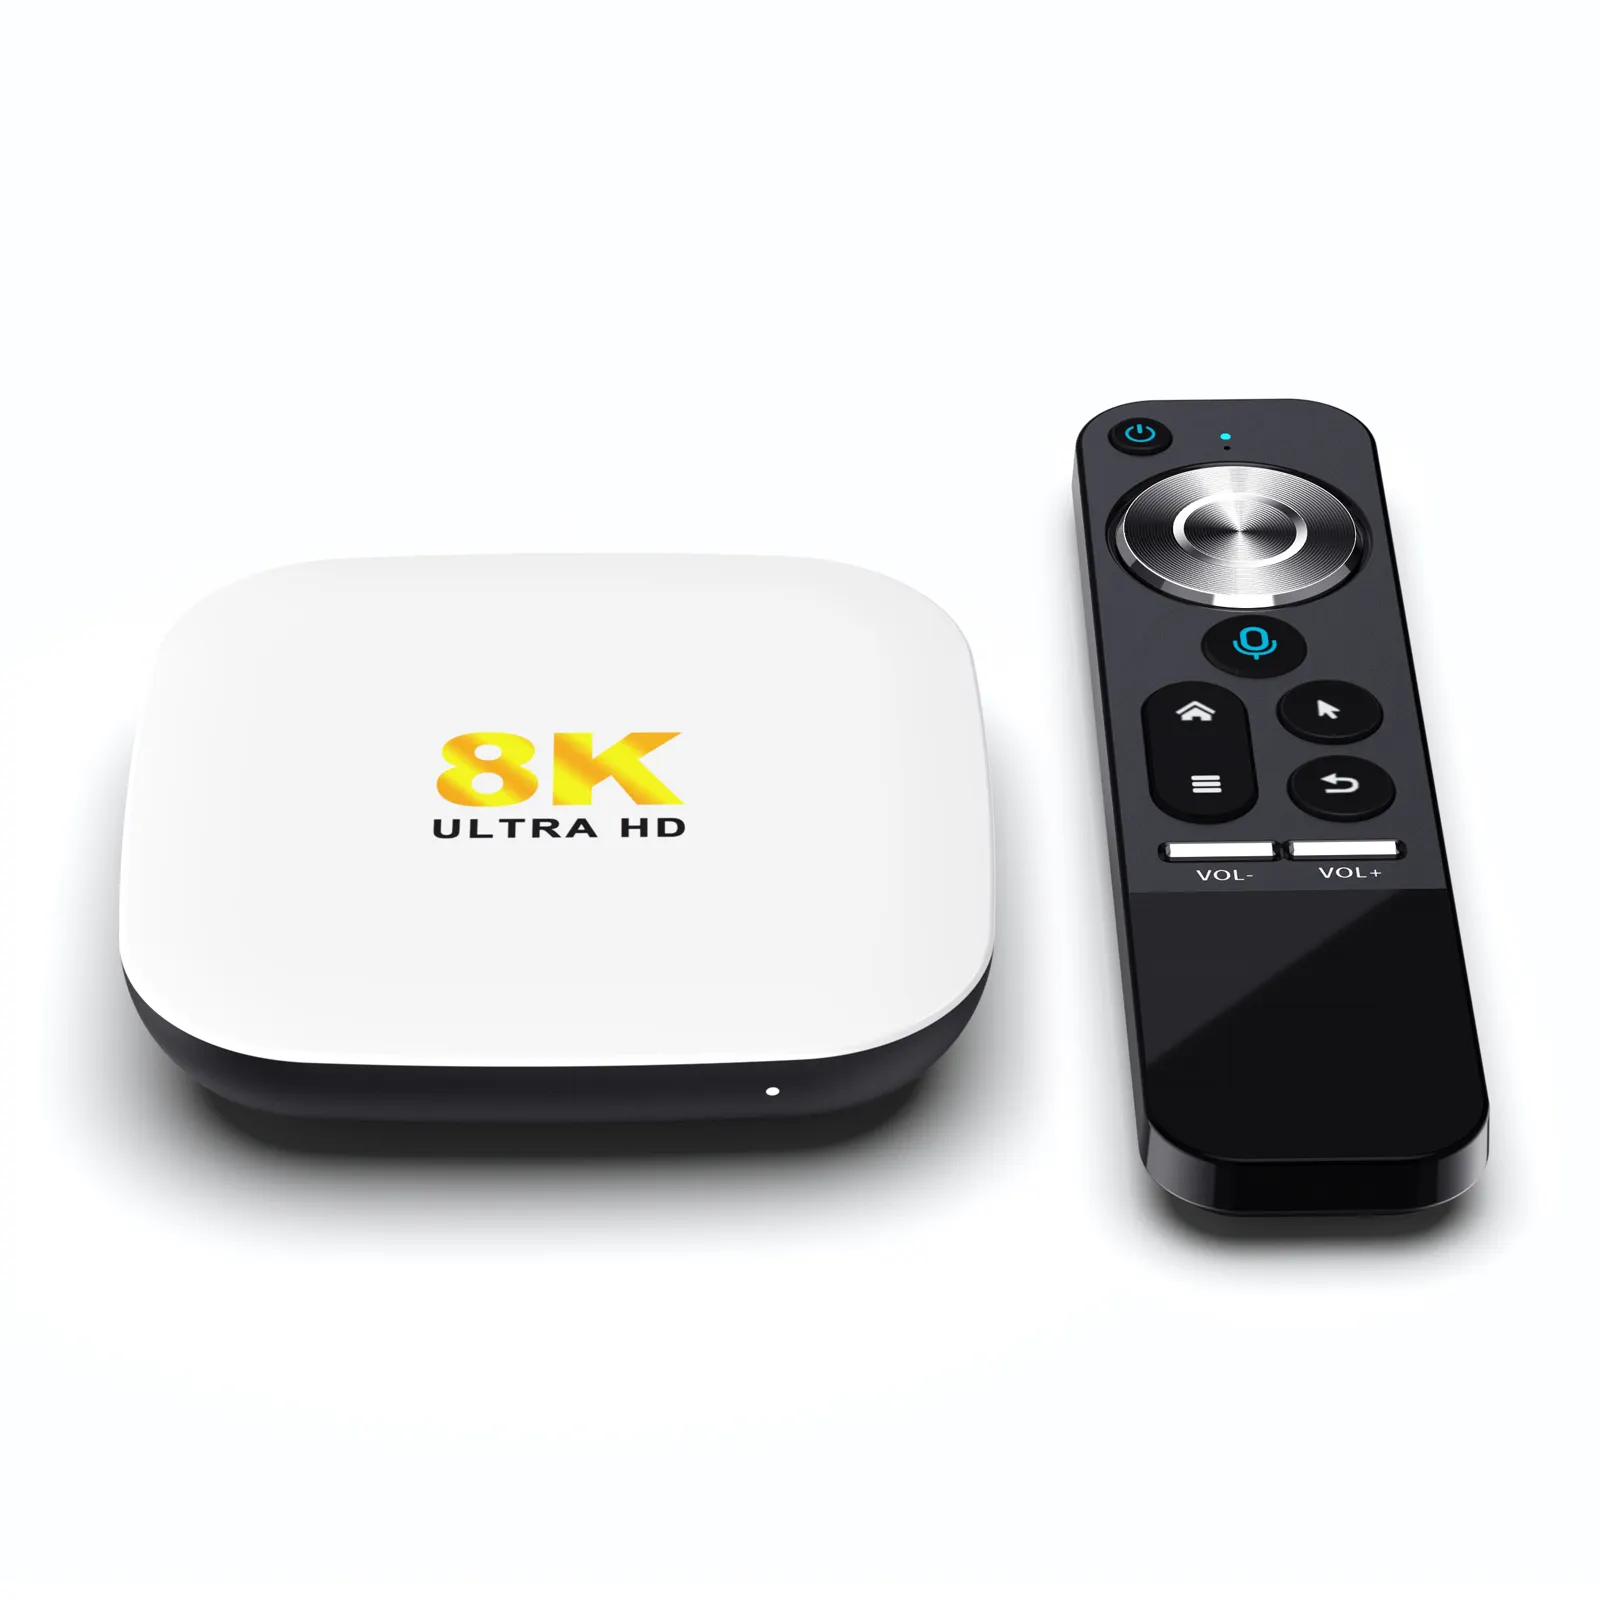 Shenzhen IMO Nueva Llegada 8K H96 MAX M2 Android 13 TV Box 4GB 64GB RK3528 2,4G/5G Wifi BT 4K HD Set Top Box Google Play YouTube